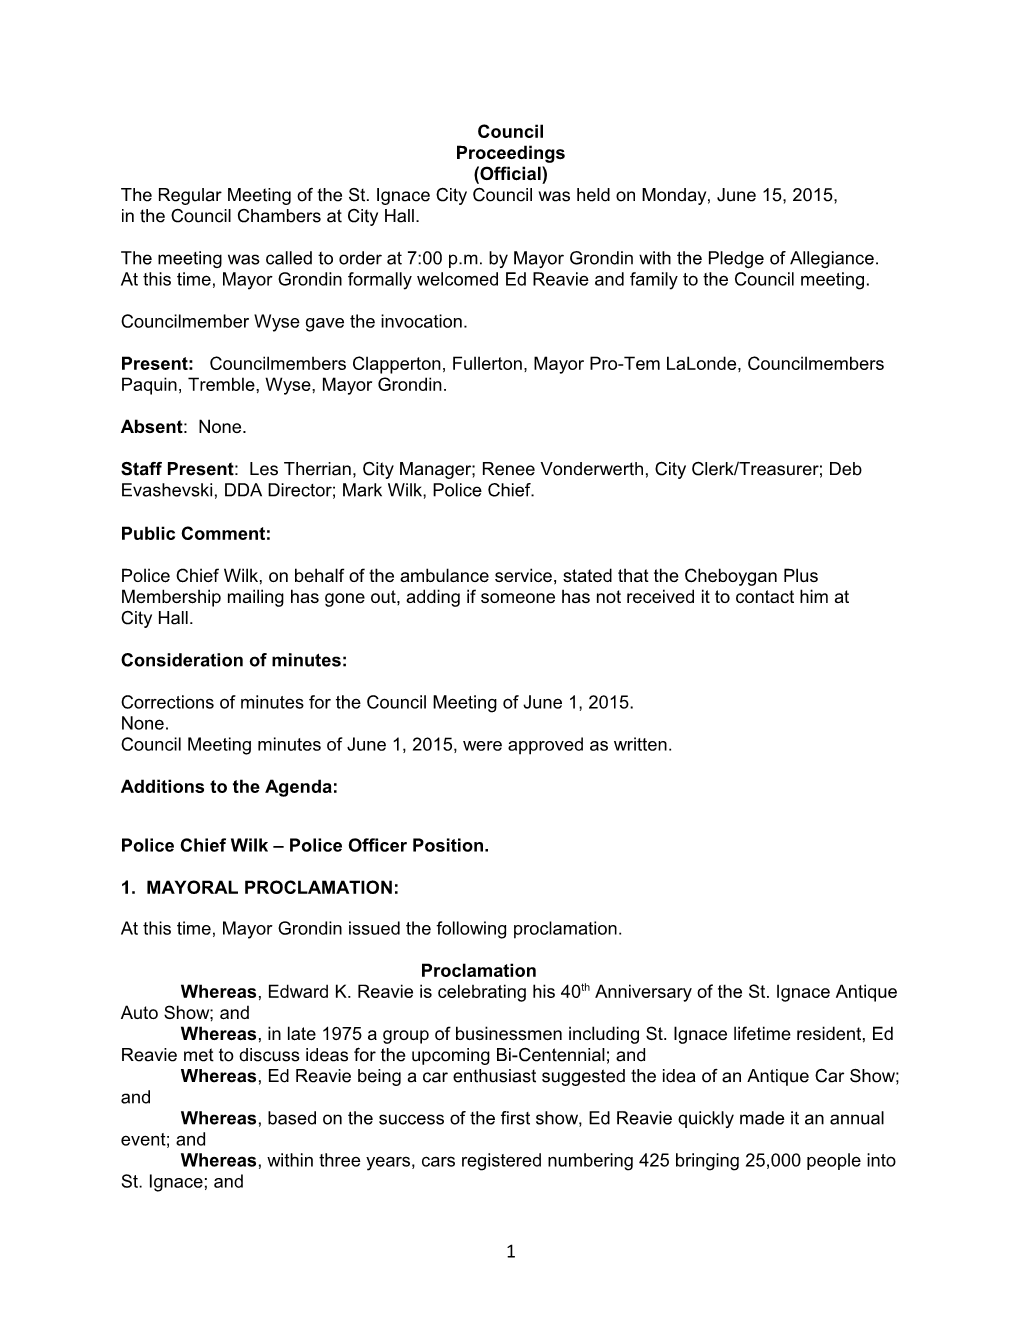 The Regular Meeting of the St. Ignace City Council Was Held on Monday, June 15, 2015